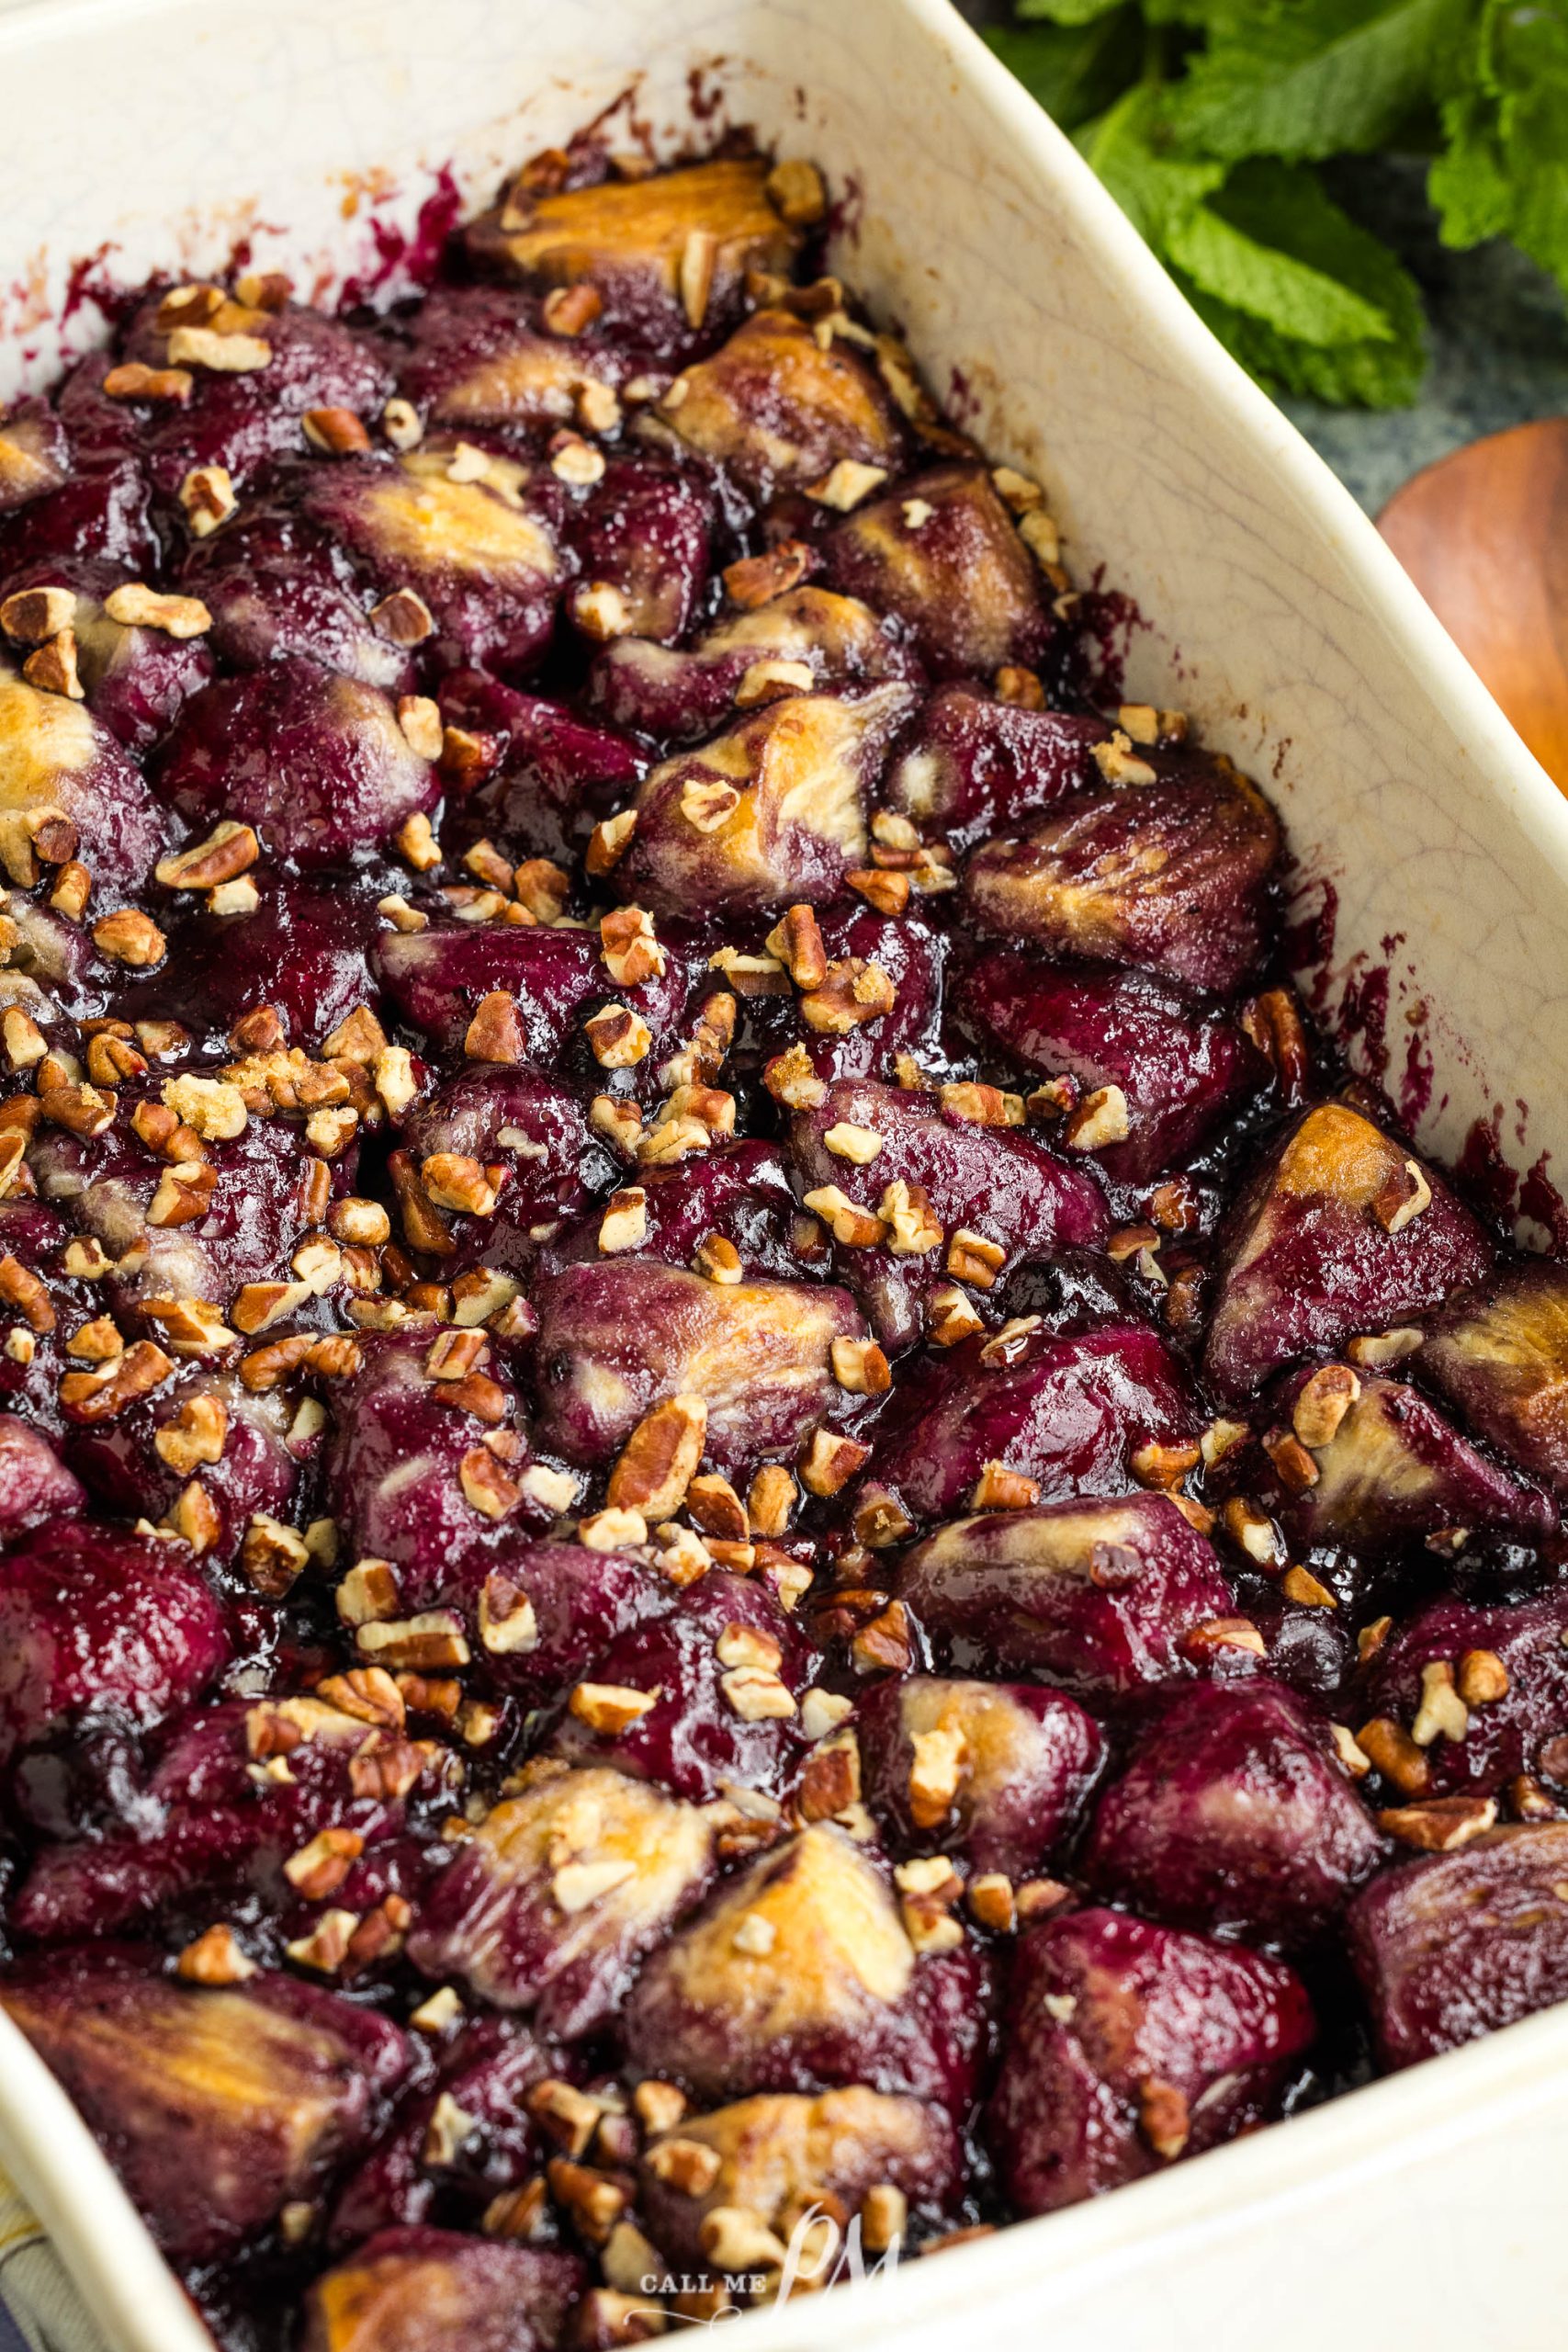 A baked Blueberry Cobbler Bubble-Up dessert featuring pieces of fruit and nuts in a rectangular dish. The fruit appears browned on the edges and is covered with a layer of crushed nuts.